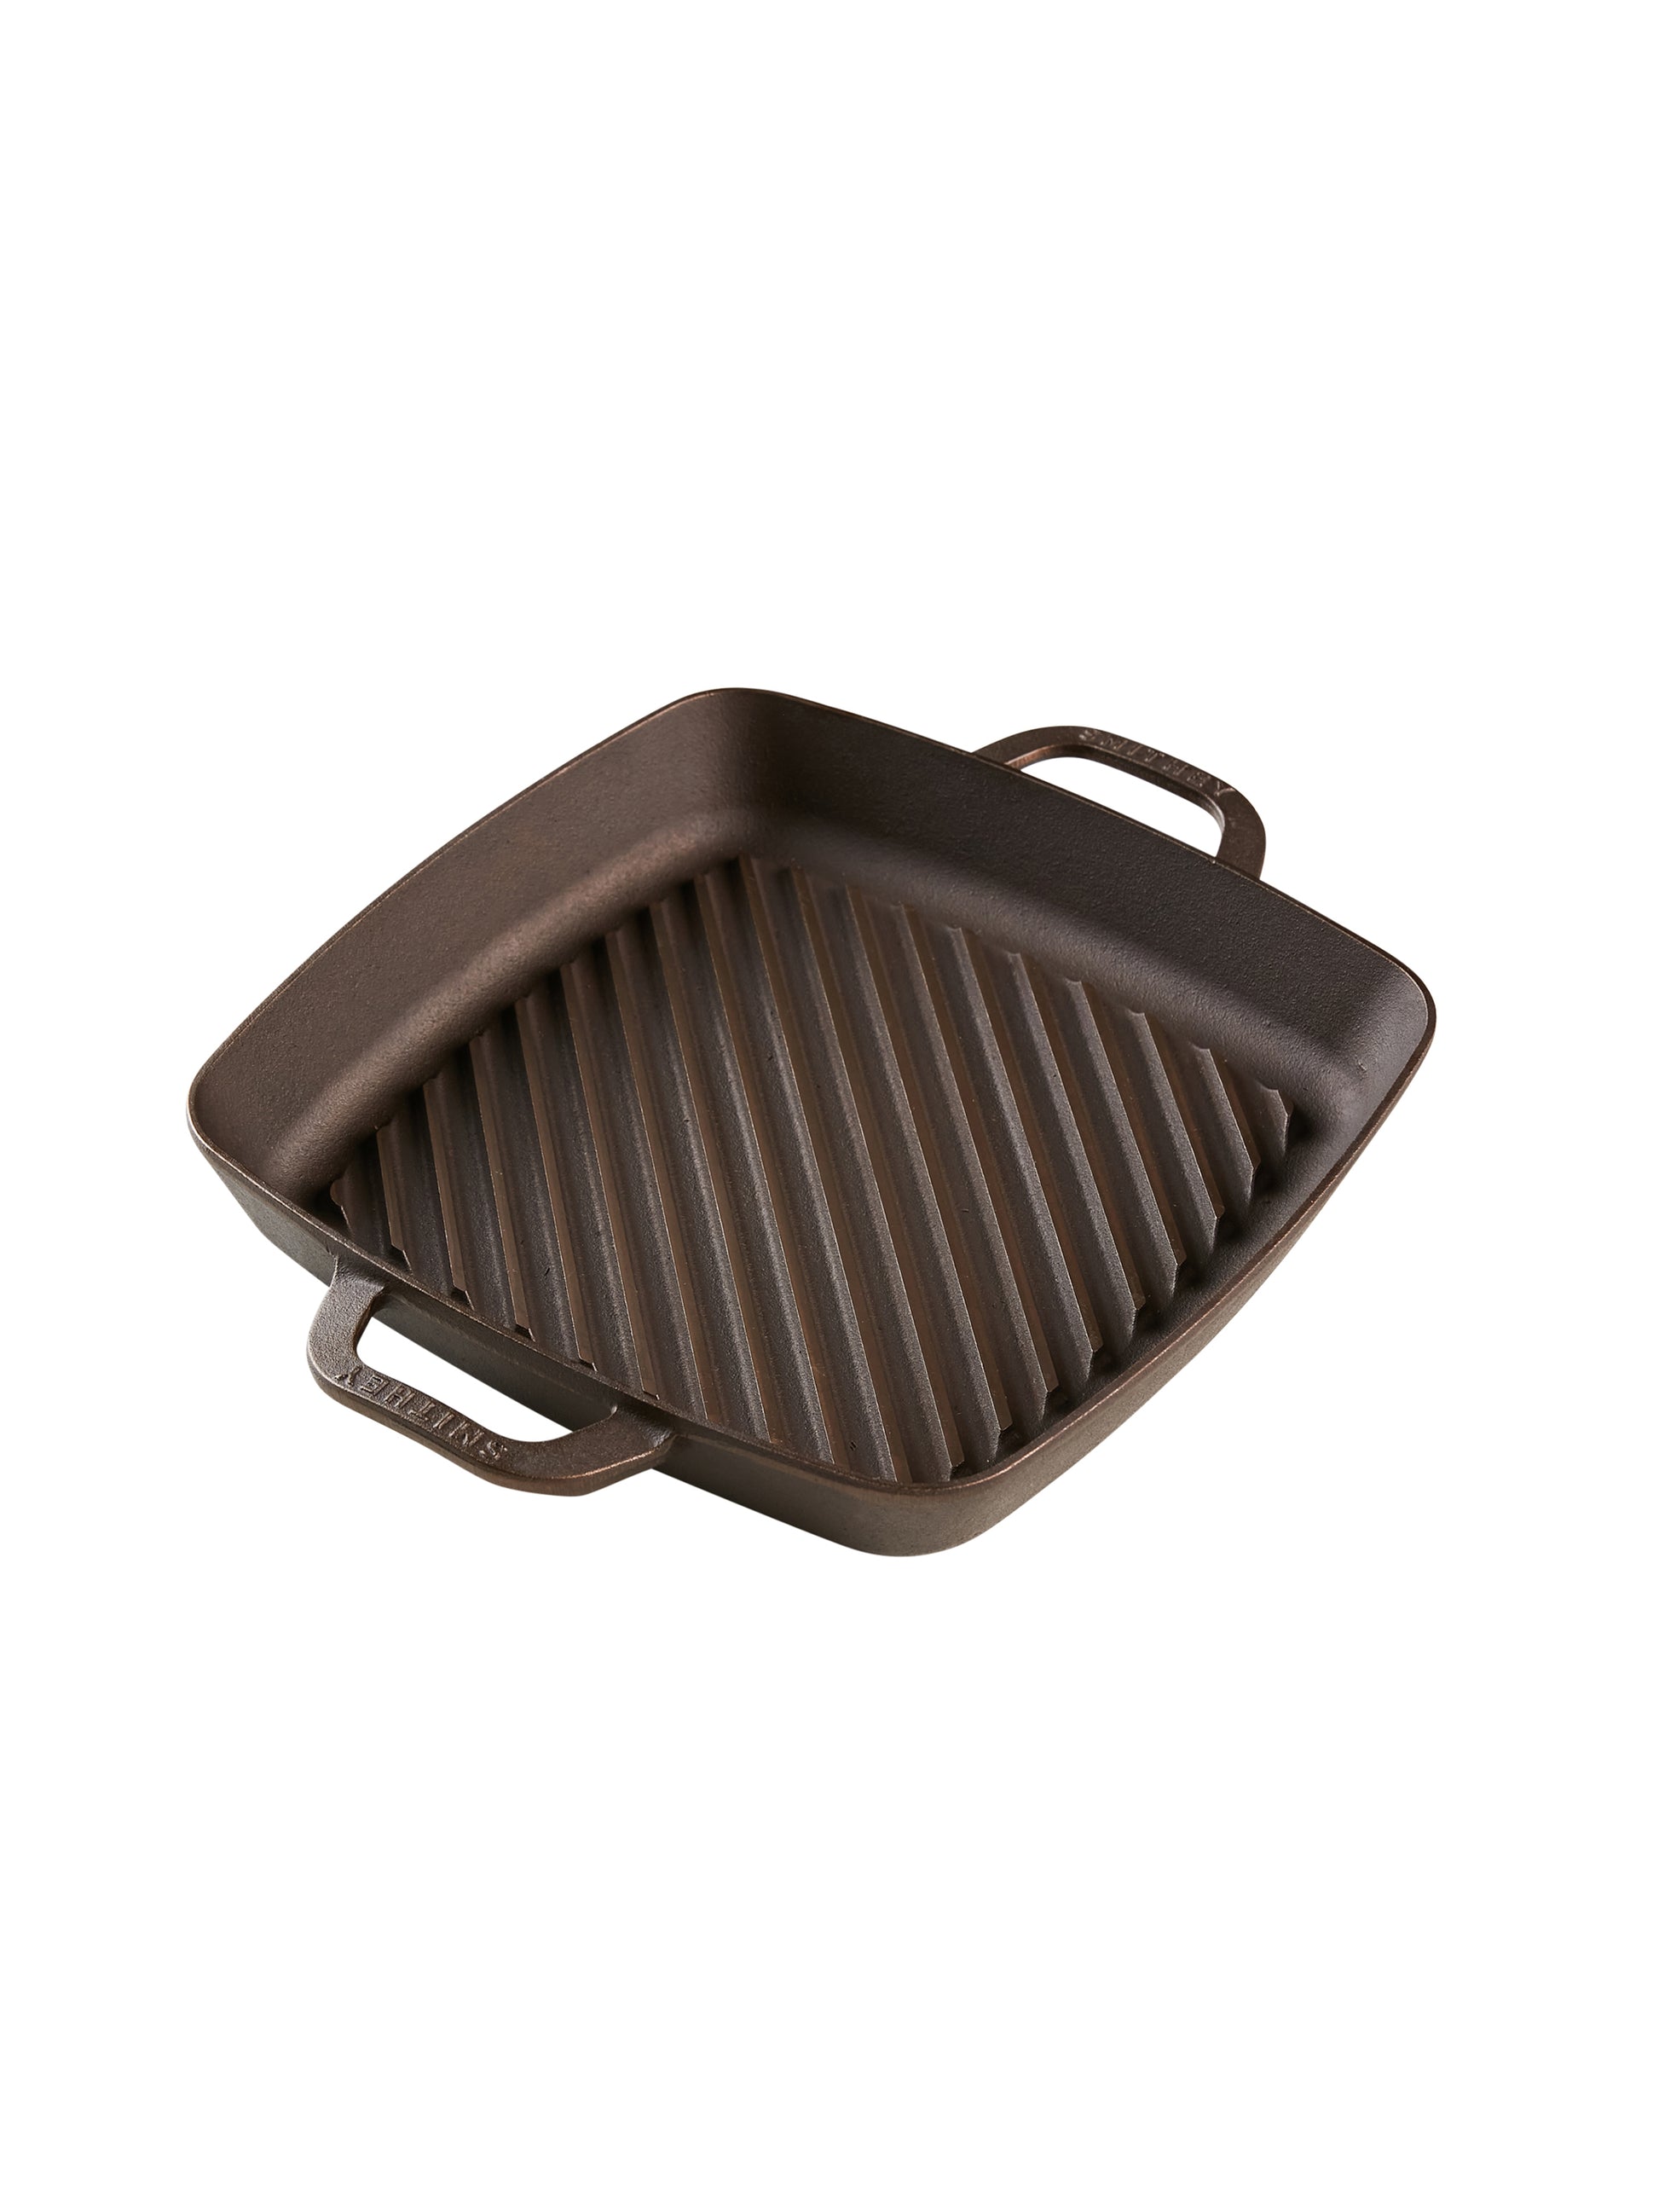 Smithey No. 12 Cast Iron Grill Pan Weston Table